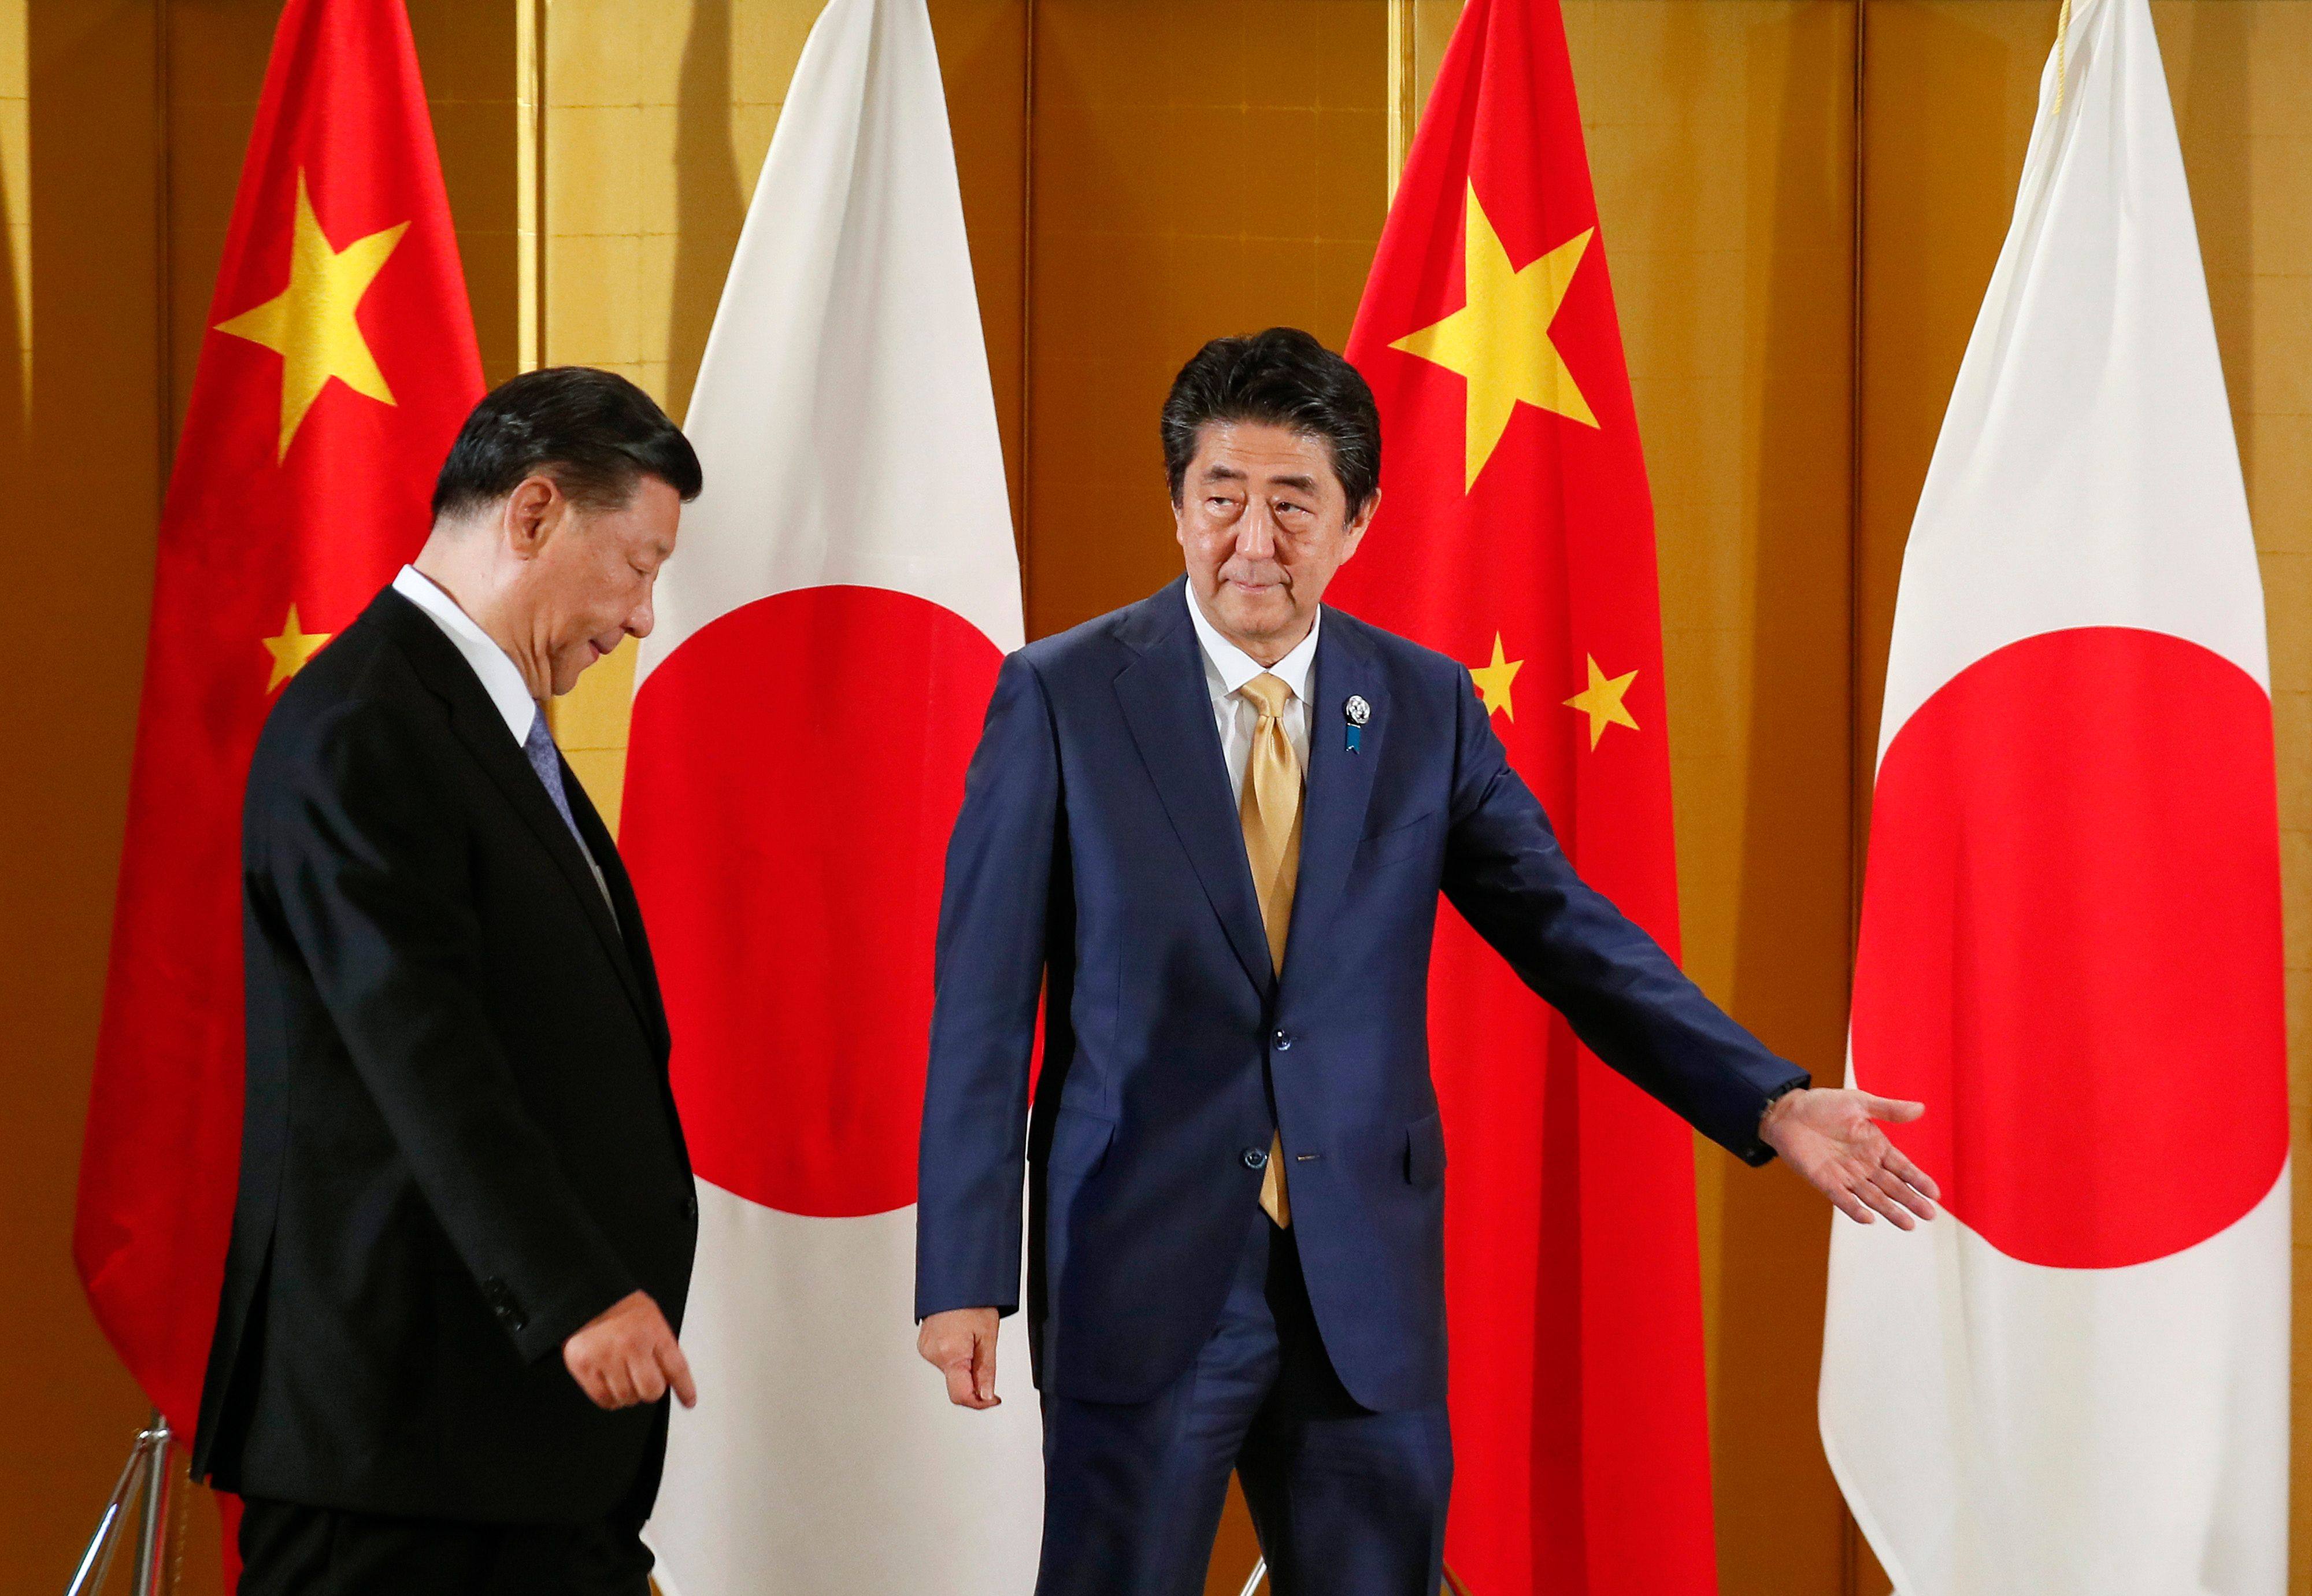 Chinese President Xi Jinping (left) is escorted by then Japanese prime minister Shinzo Abe at the start of their talks in Osaka on June 27, 2019, ahead of the G20 summit. Photo: AFP